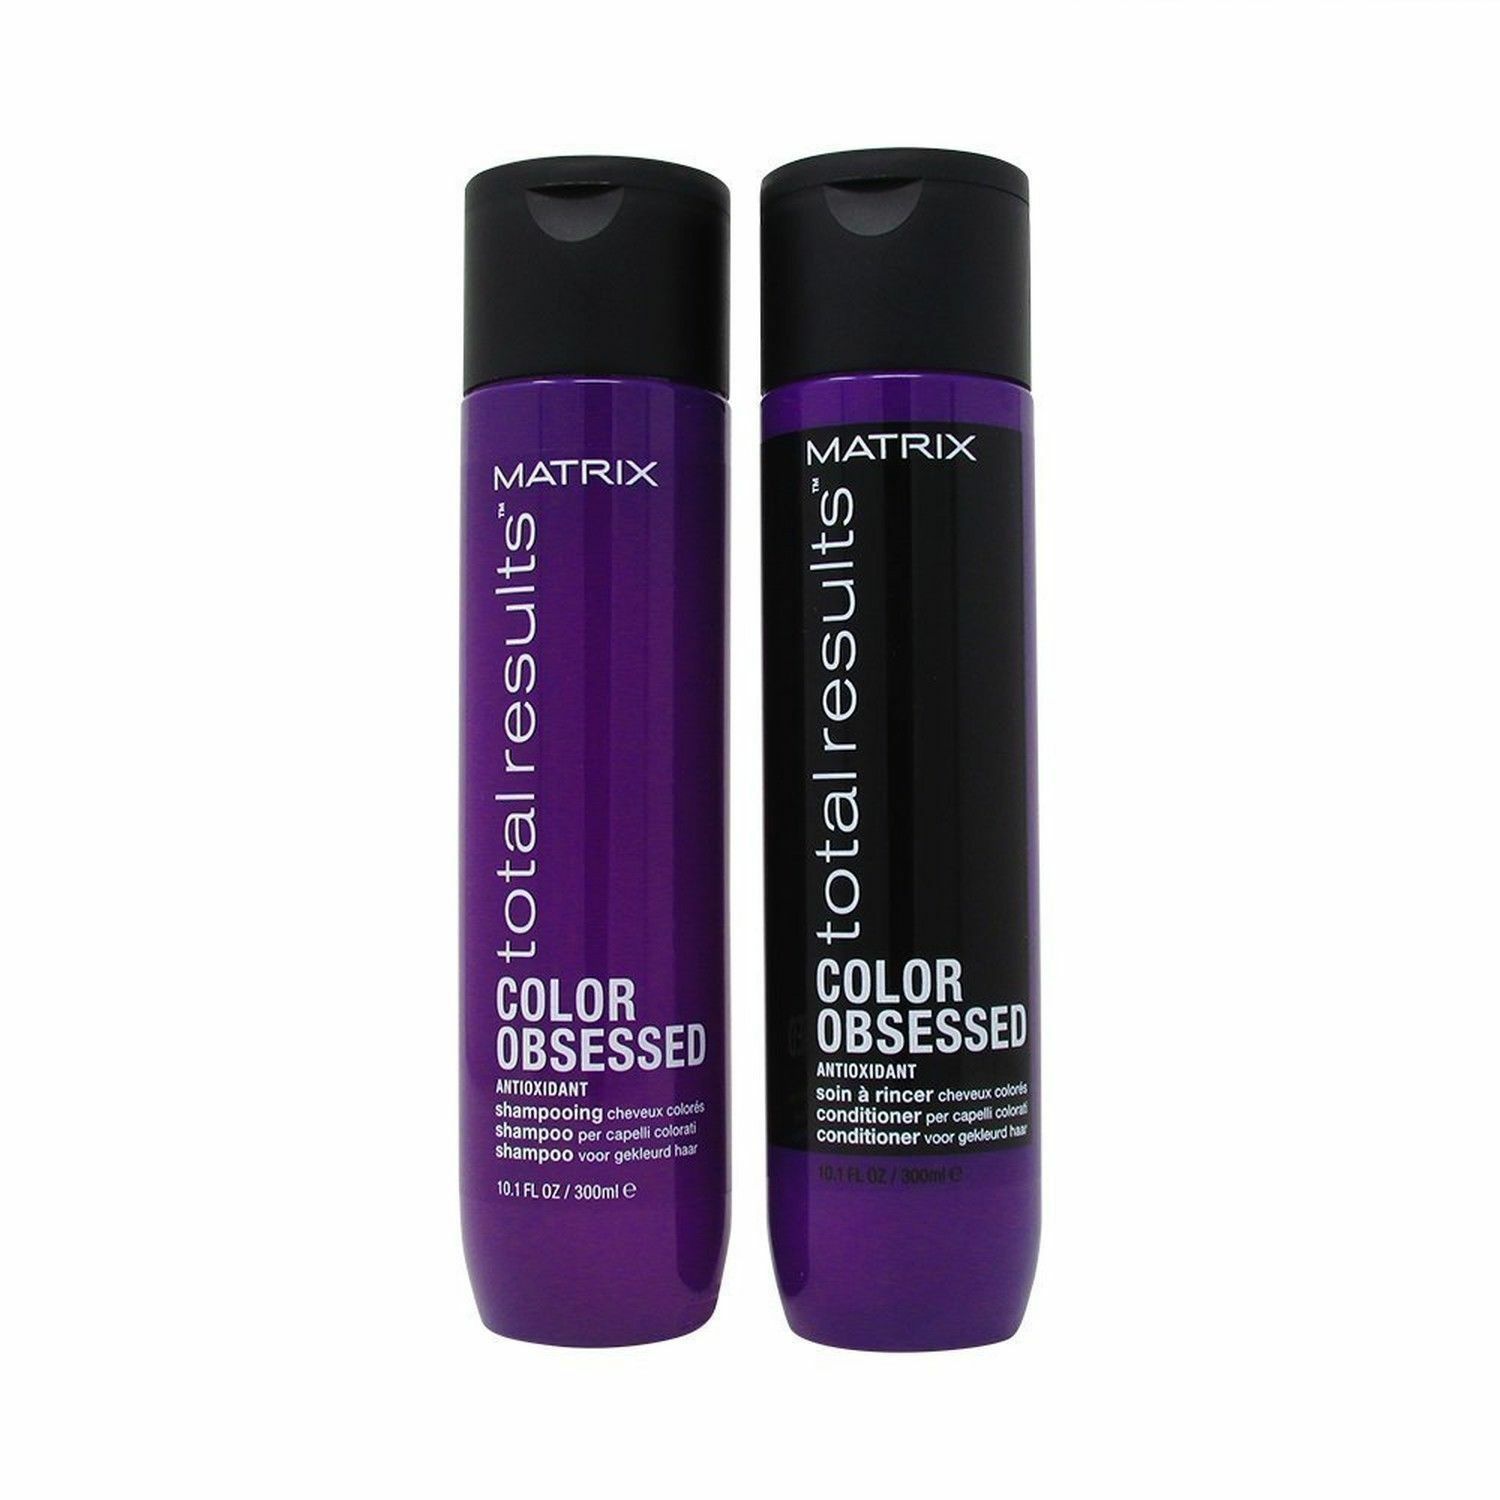 Matrix Total Results Farbe Obsessed Shampoo Haarspülung 299ml Duo - $23.26